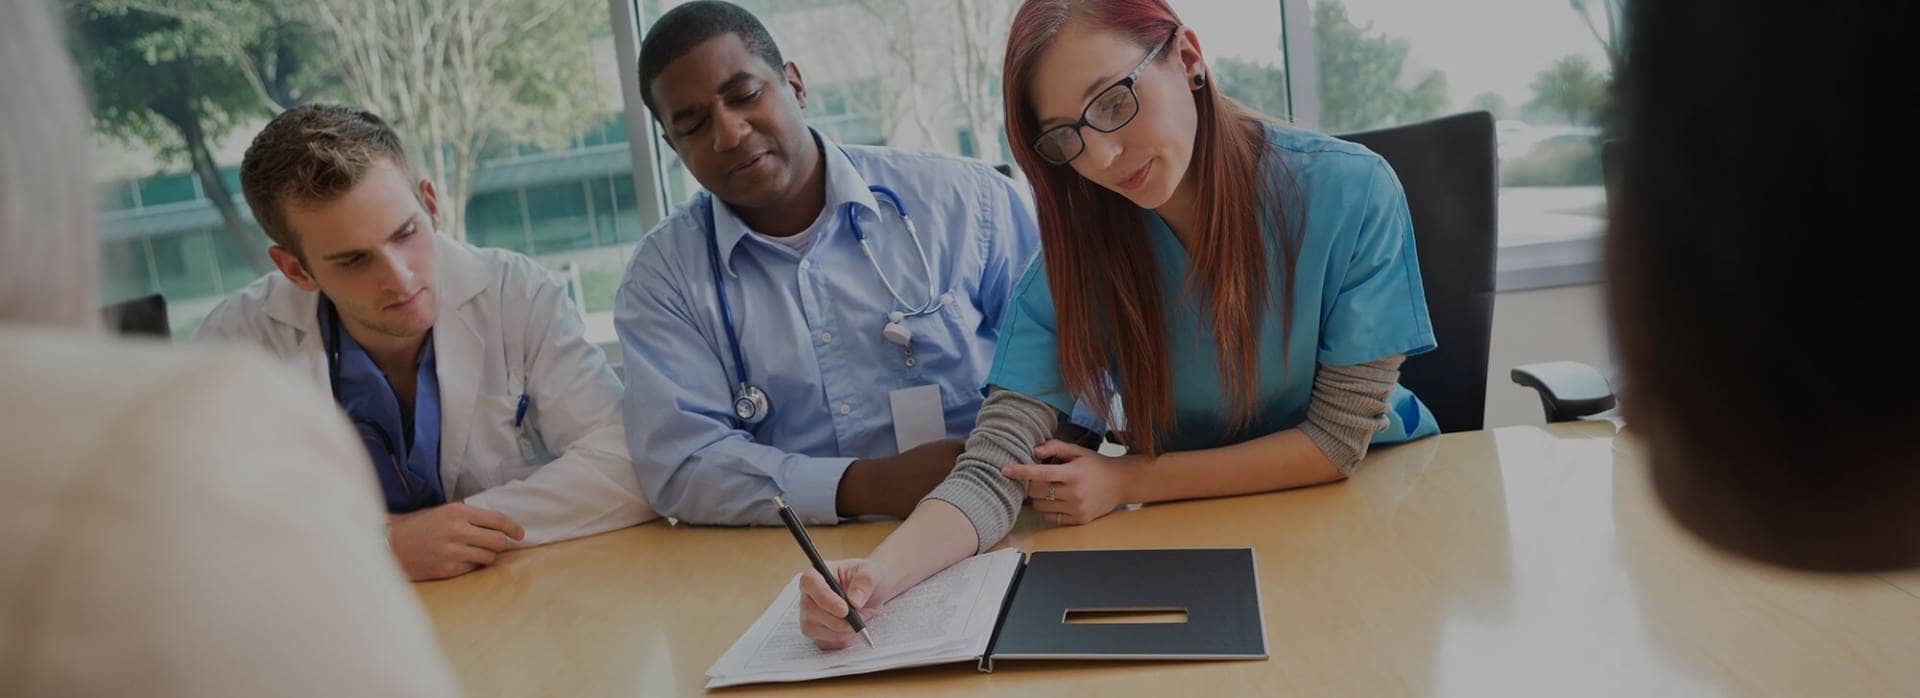 Admission Requirements: Health Care Policy & Regulation Graduate Certificate